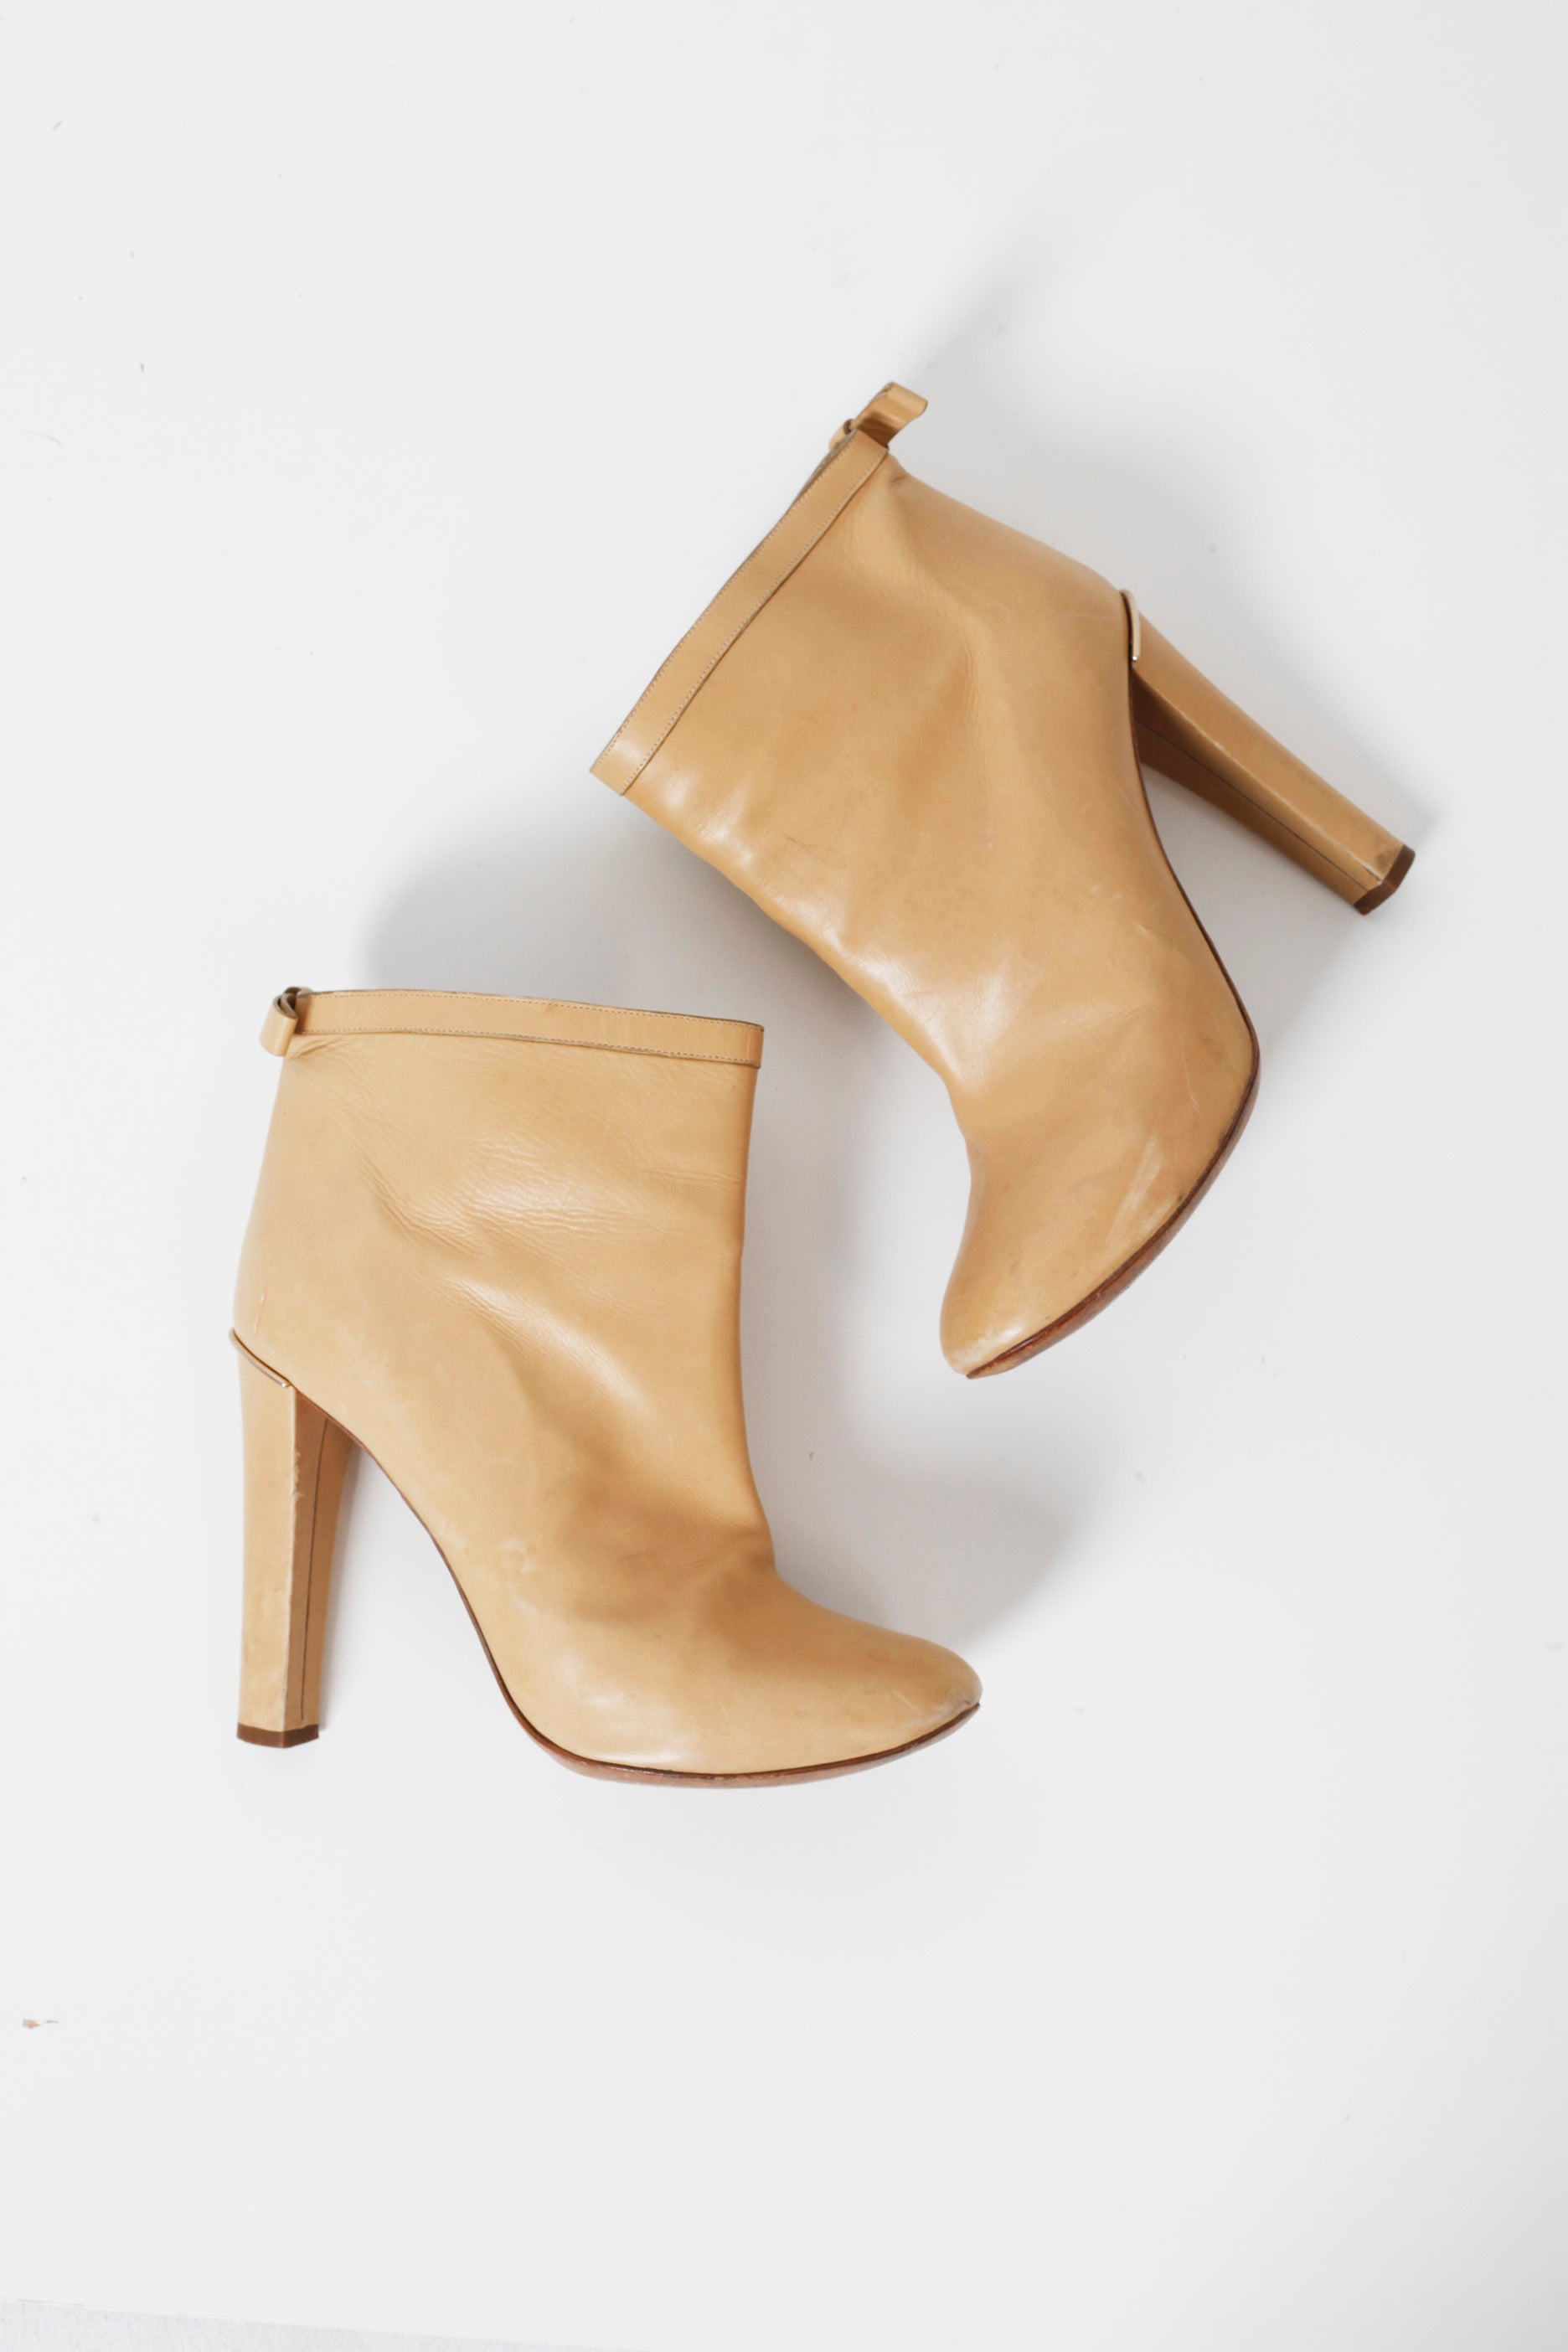 Chloé Beige Leather Ankle Boots